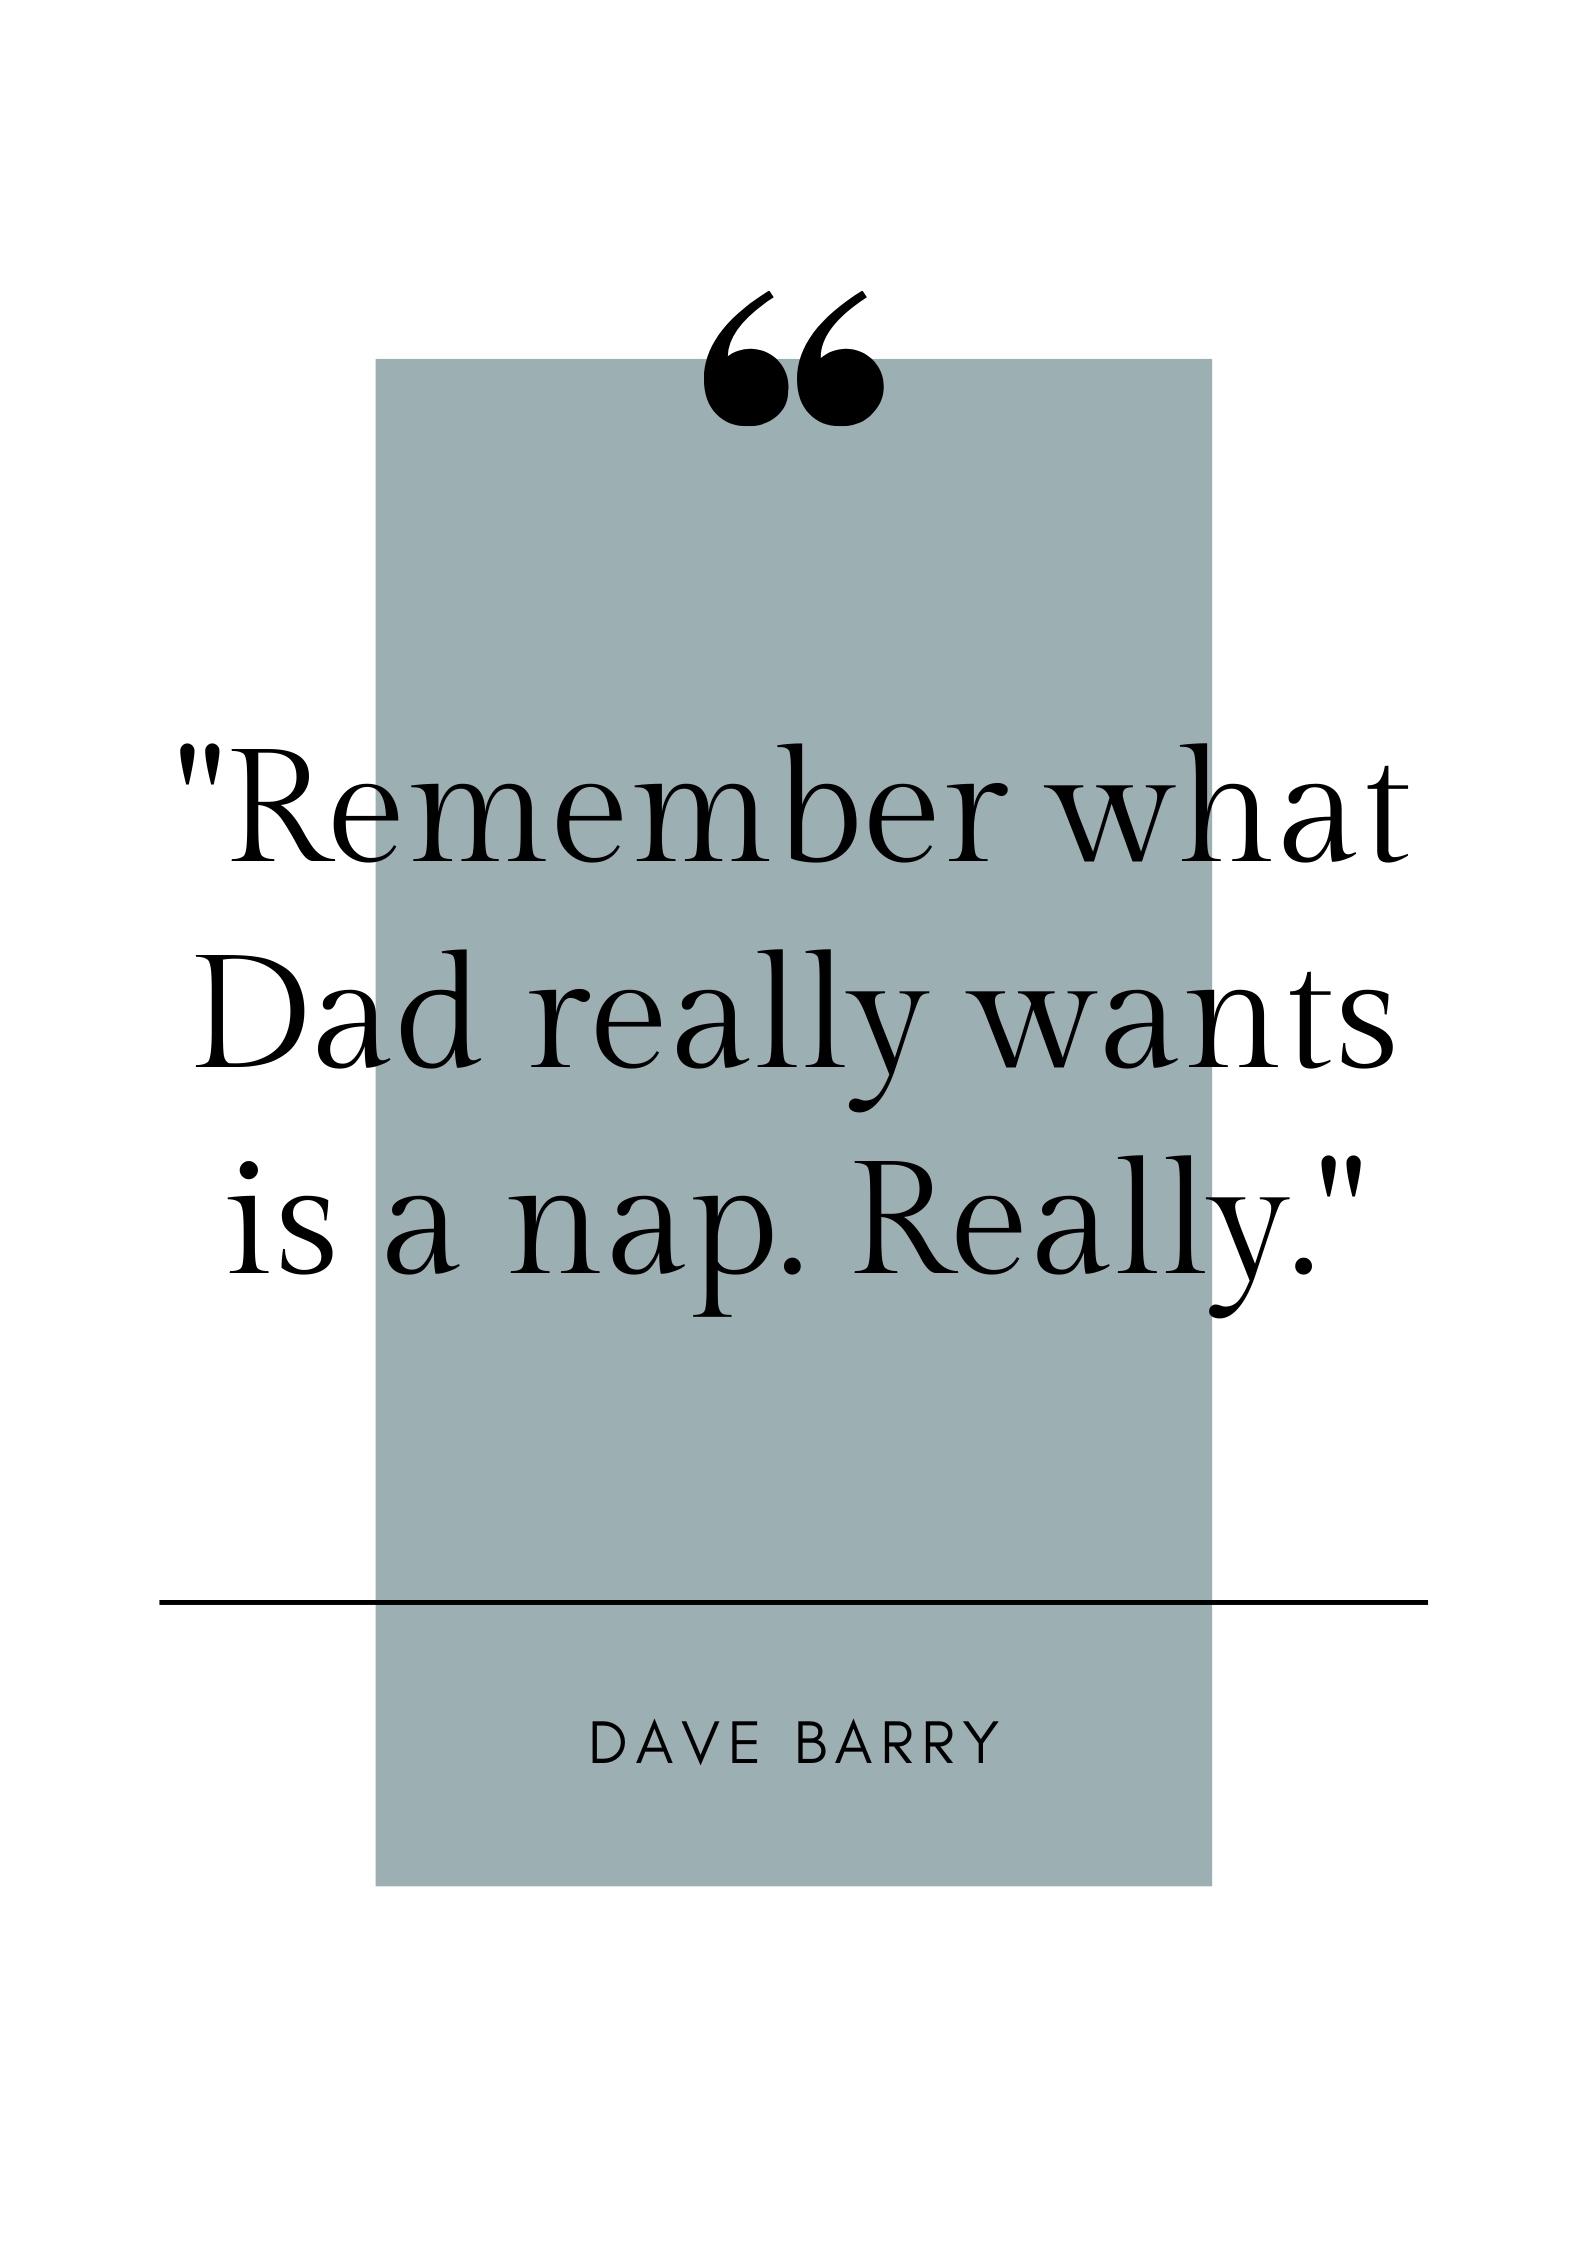 funny dad quote